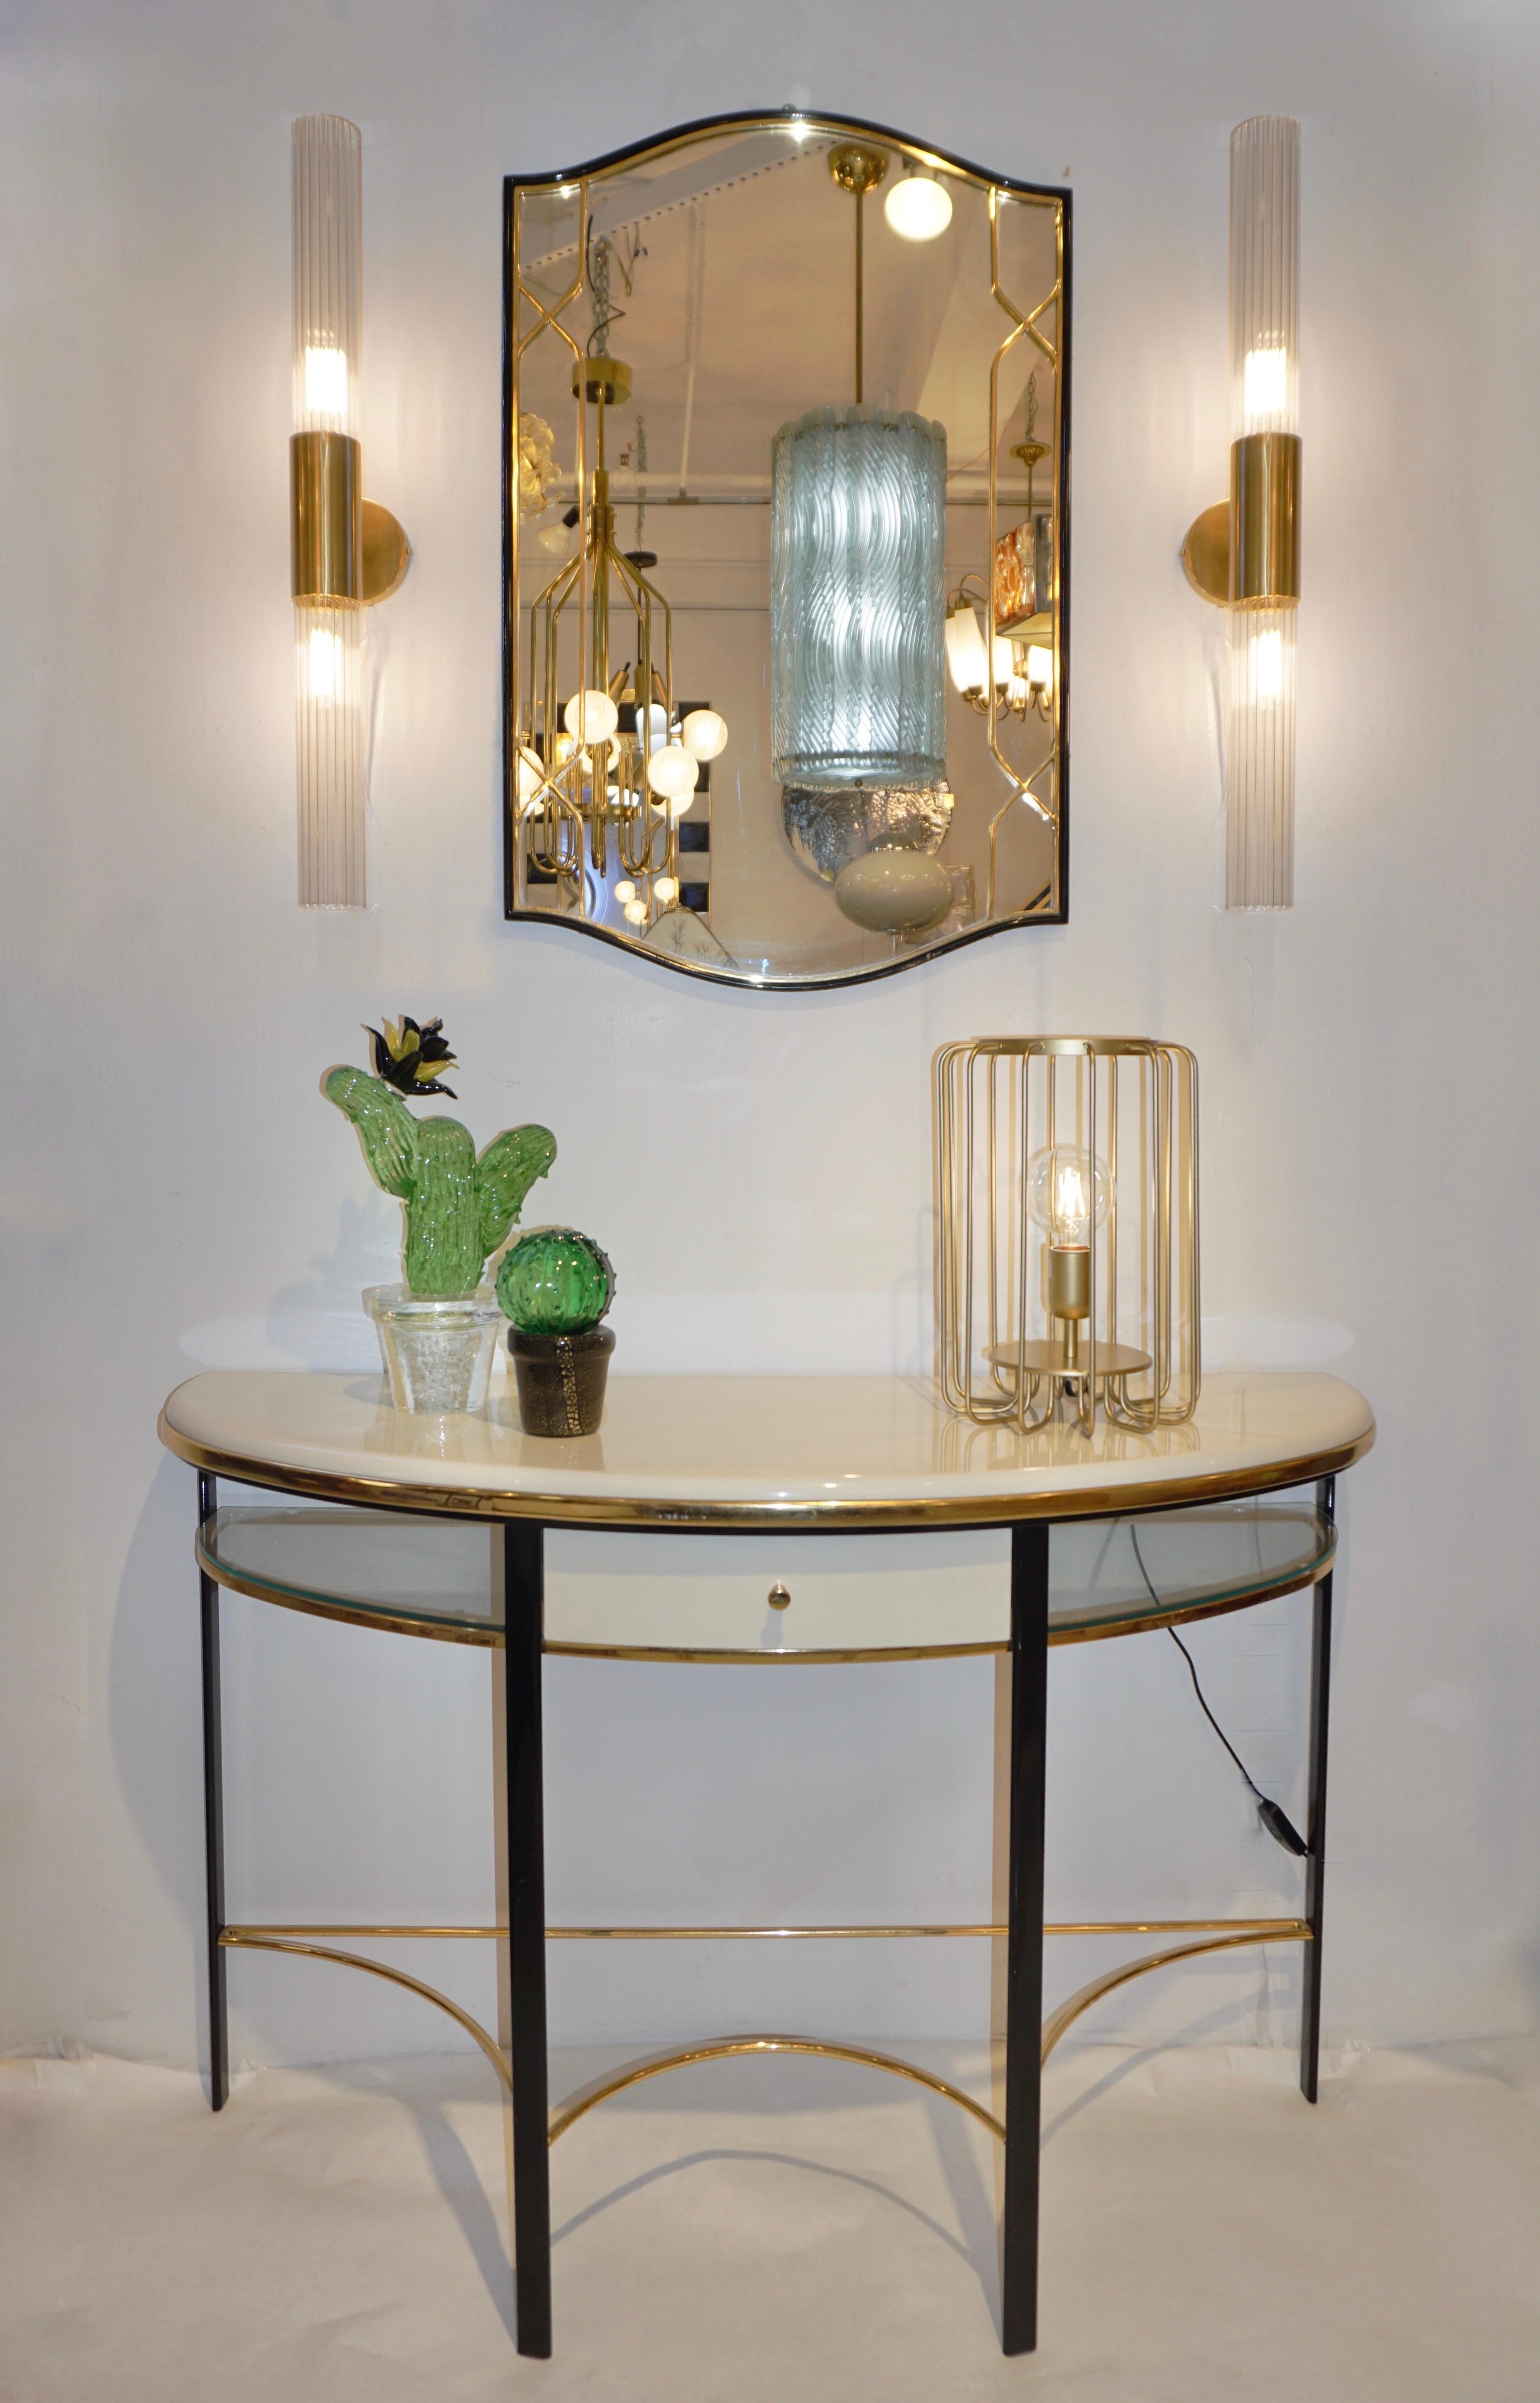 1970s vintage Italian one-of-a-kind Art Deco Design demilune console in black, ivory cream, and gold, entirely handcrafted. The functional architectural half-round metal frame has an ivory cream lacquered wood top, elegantly fitted with arched glass